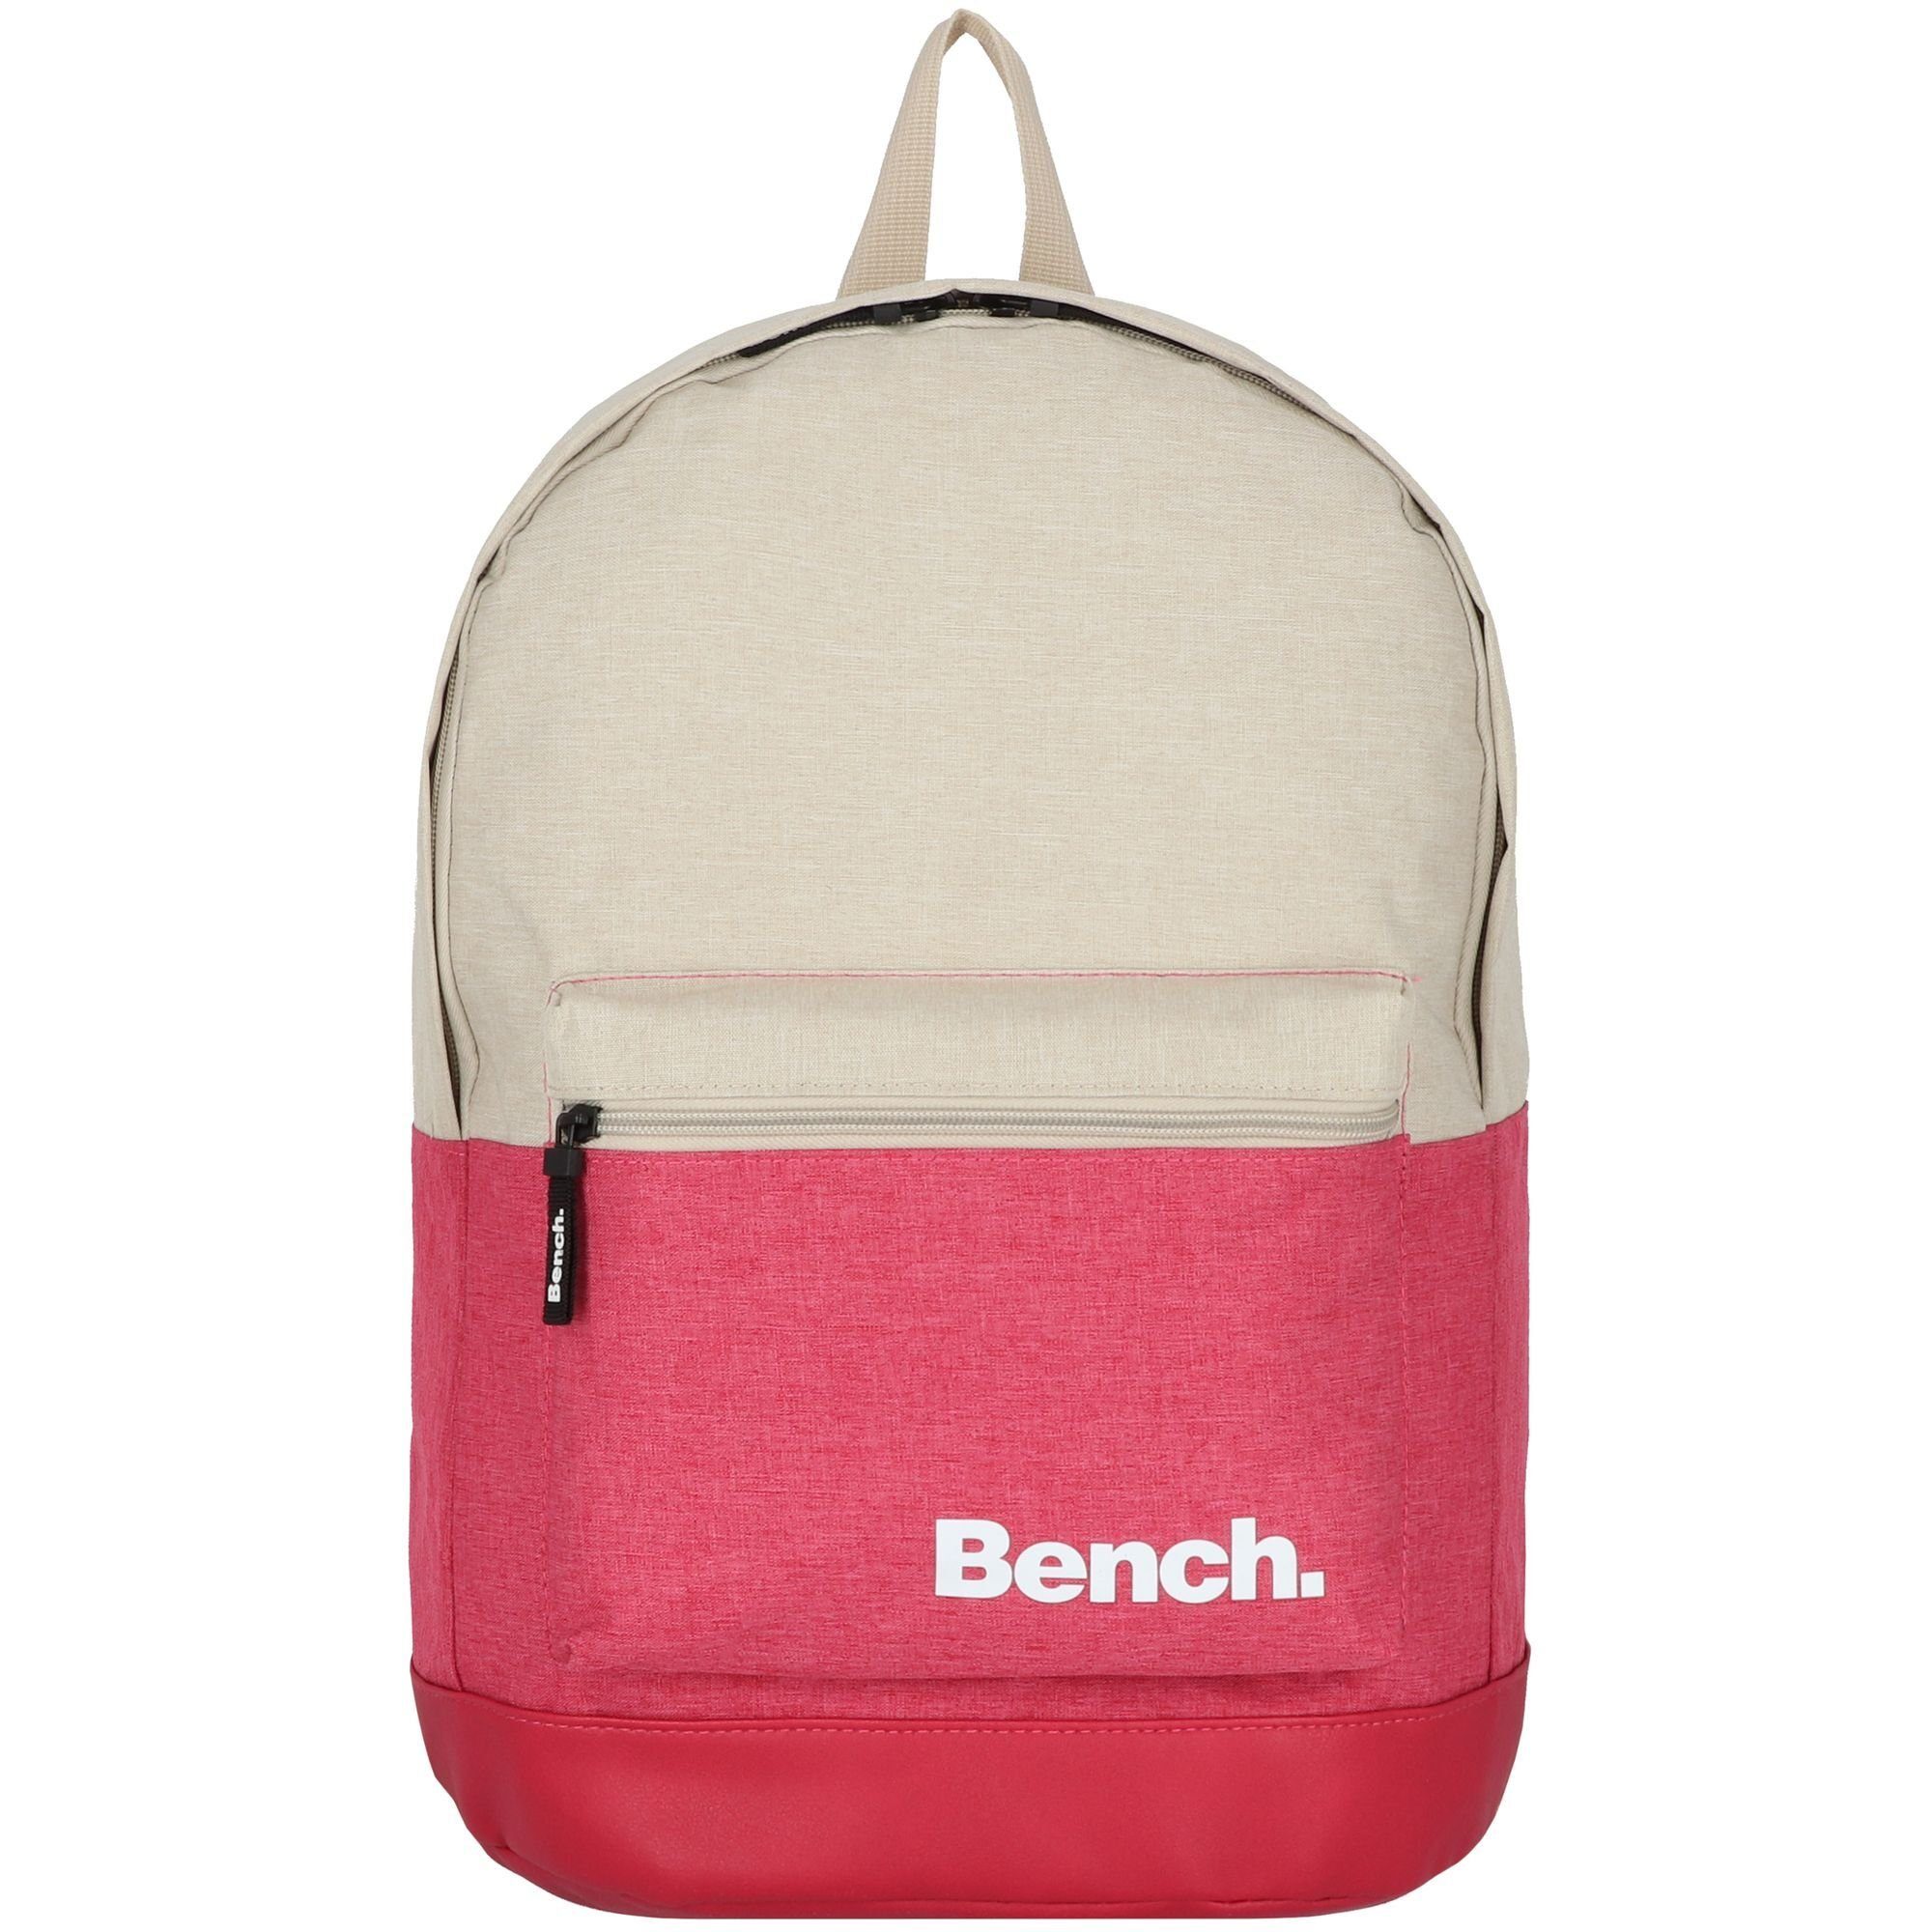 Bench. Daypack classic, Polyester pink-sand